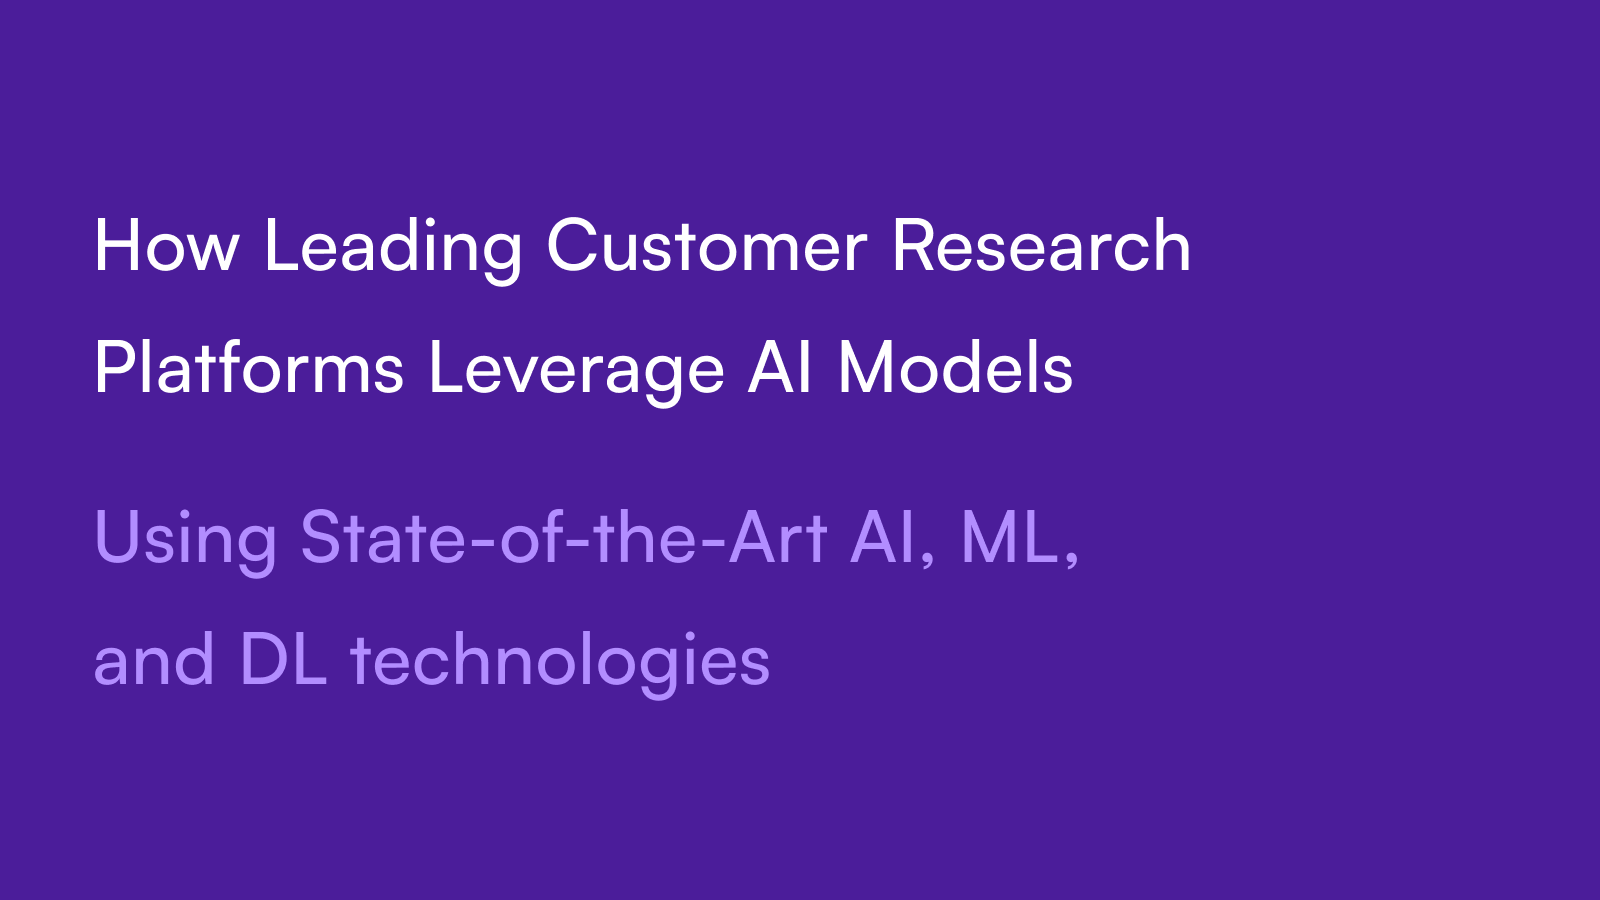 How Leading Customer Research Platforms Leverage AI Models